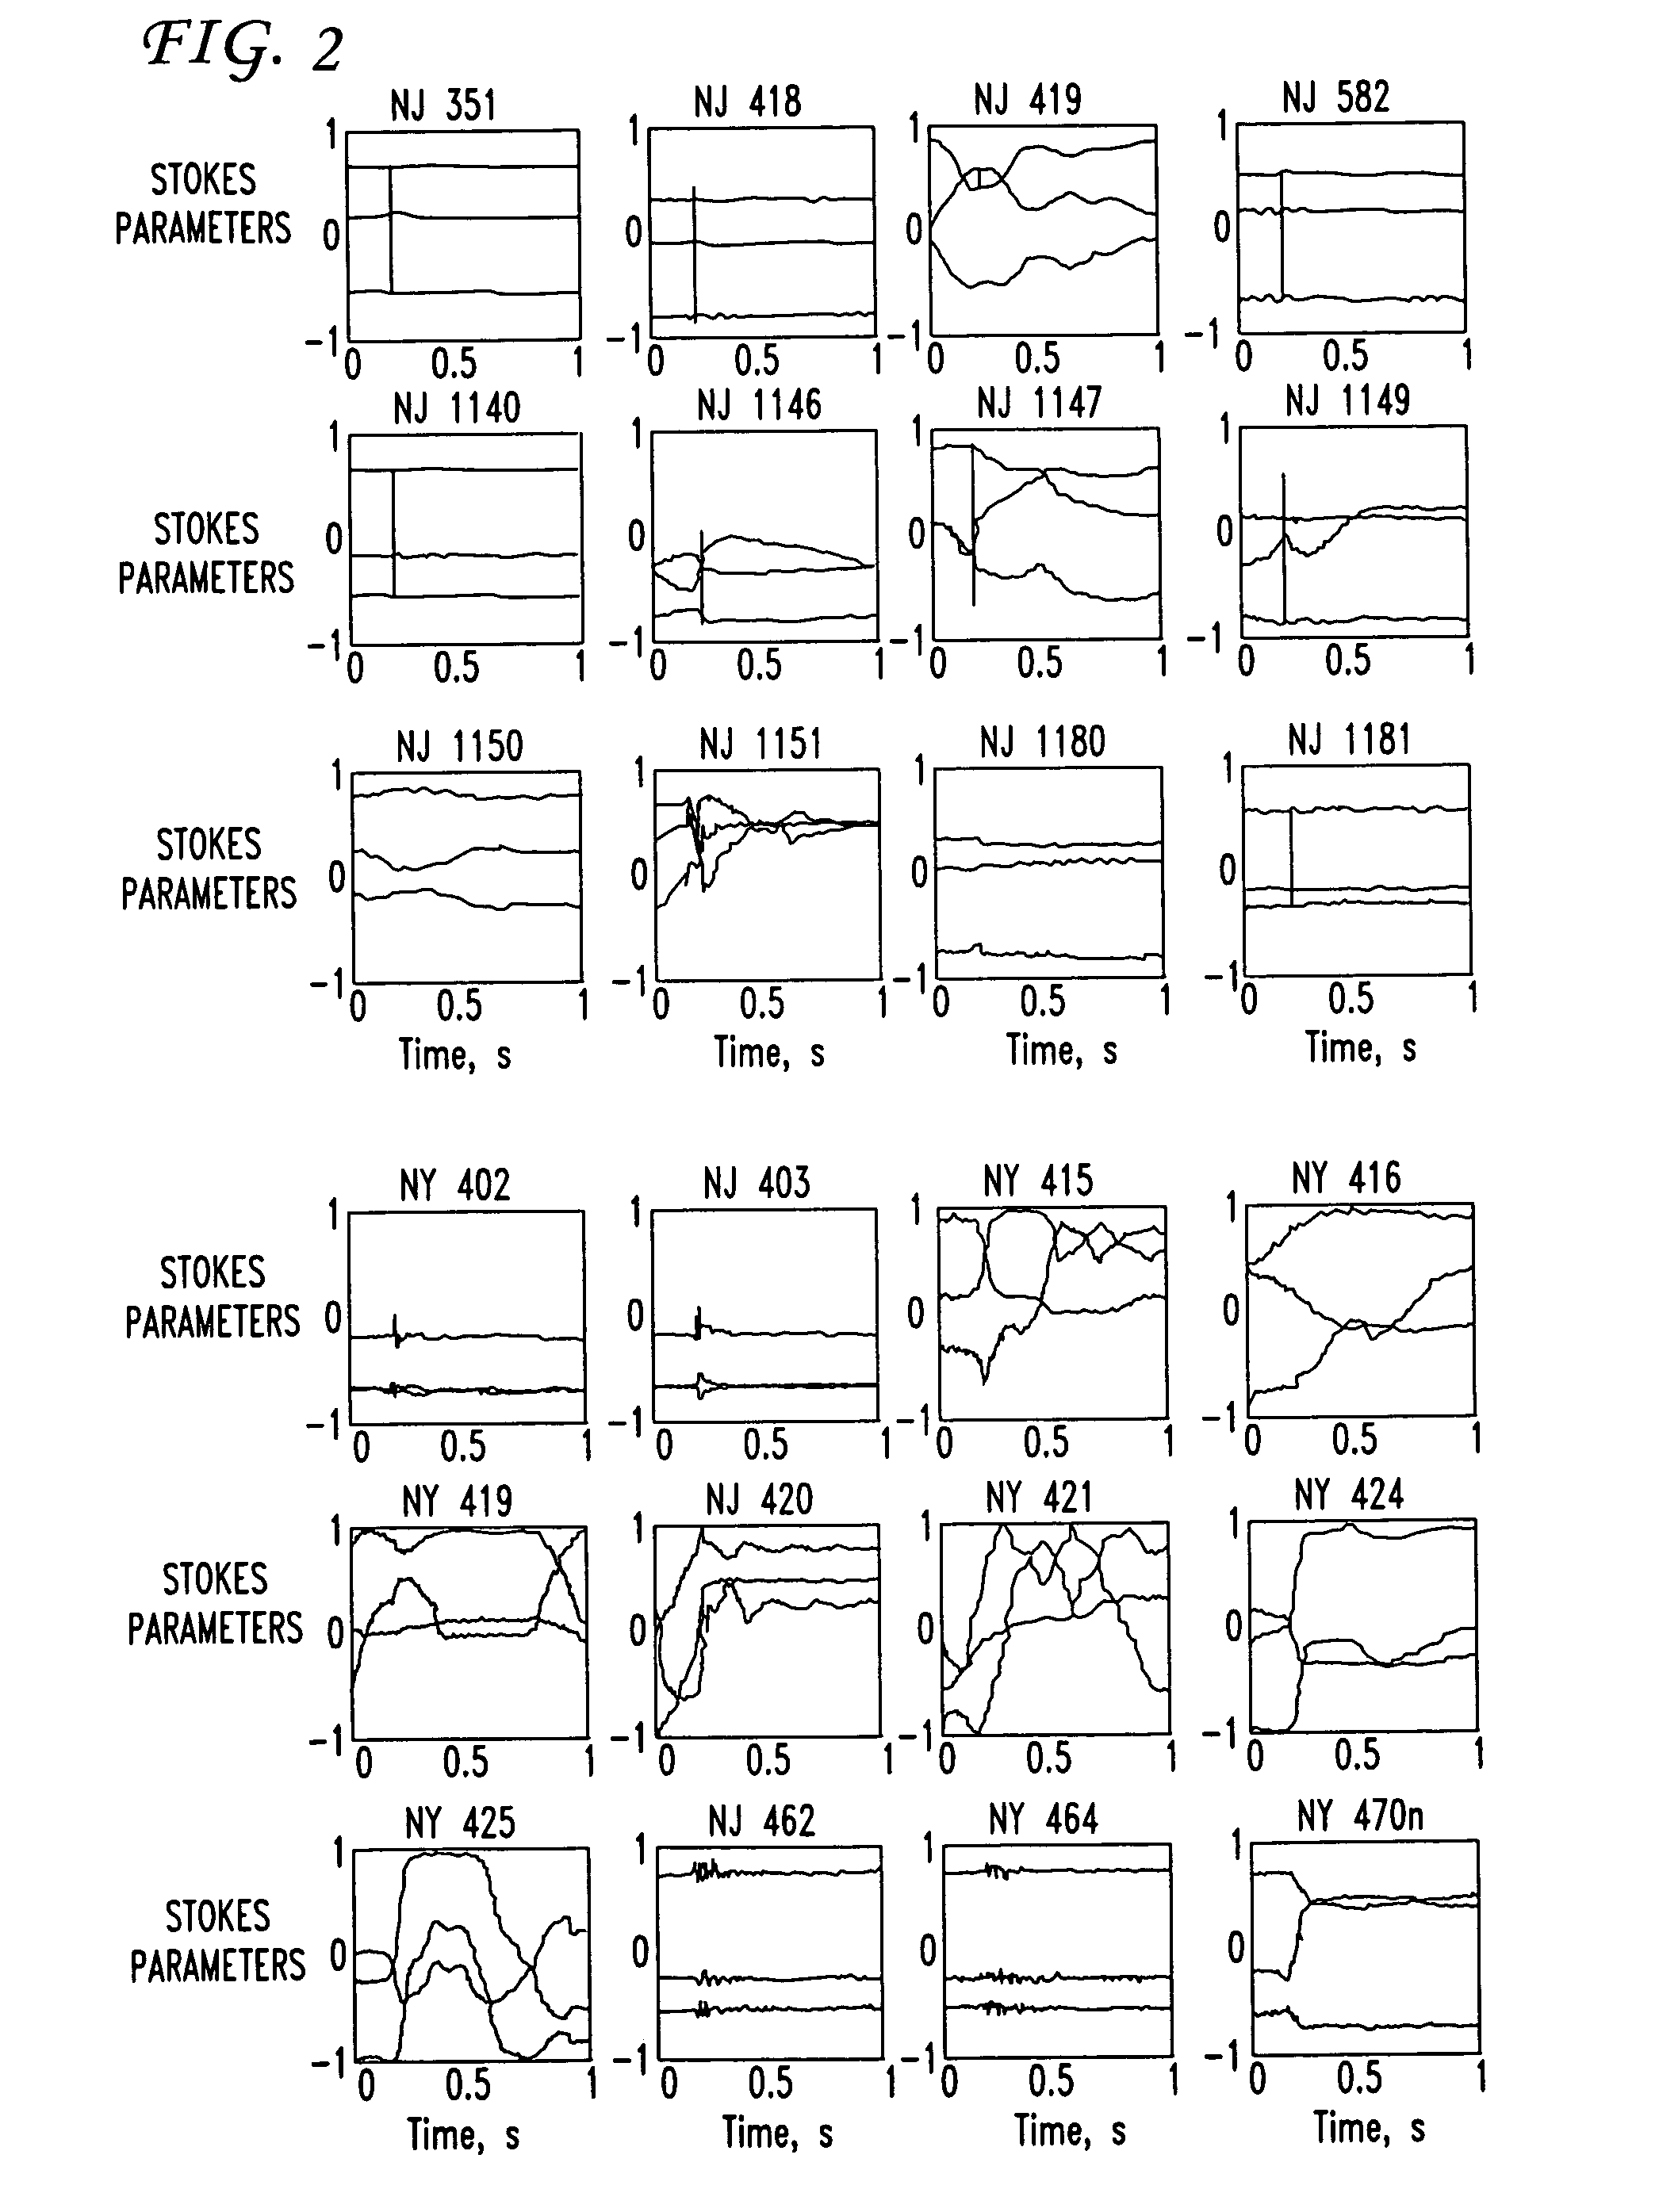 Method and apparatus for increasing the security of the physical fiber plant by polarization monitoring